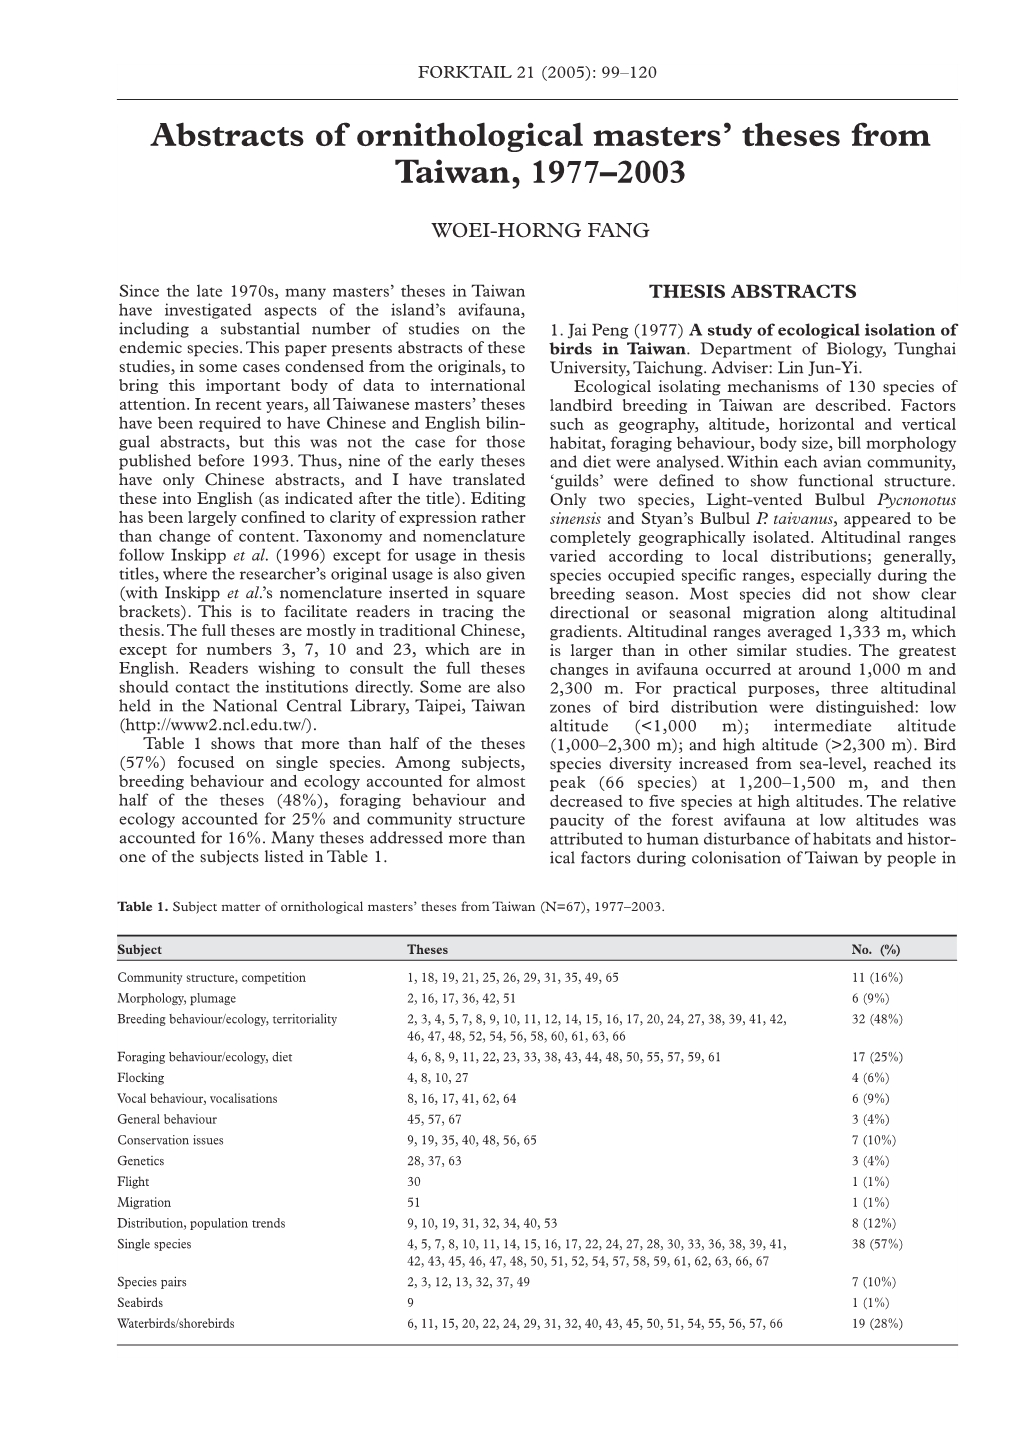 Abstracts of Ornithological Masters' Theses from Taiwan, 1977–2003